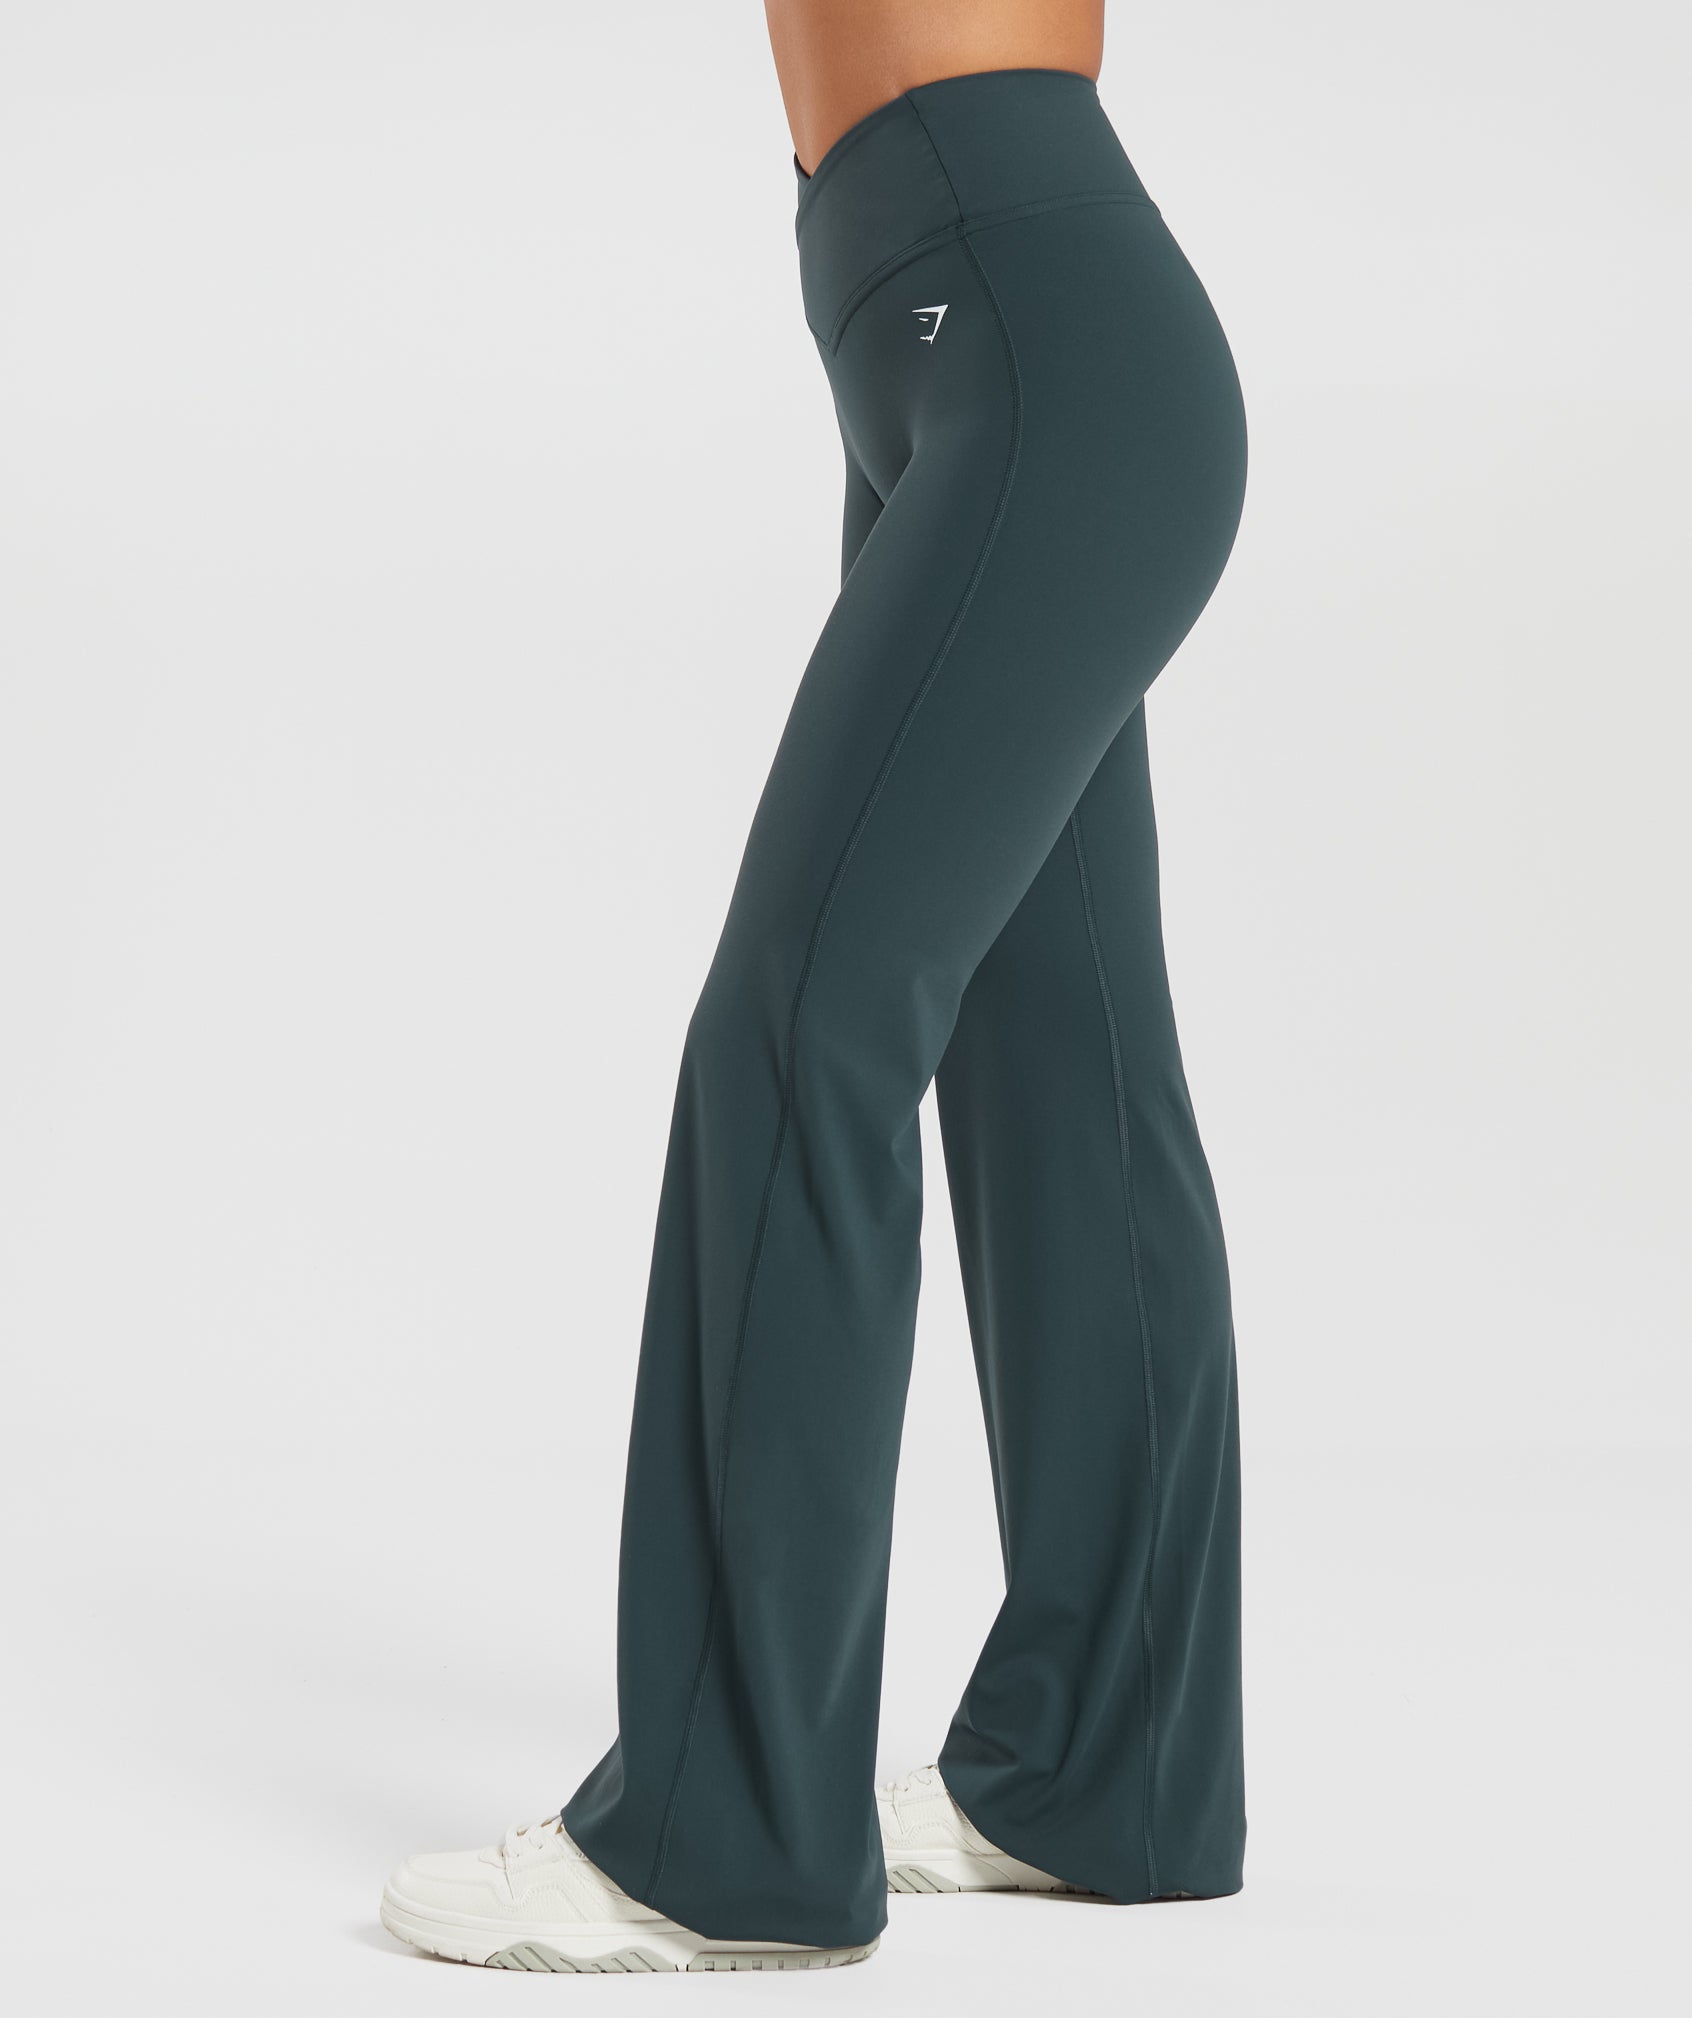 Crossover Tall Flared Leggings in Darkest Teal - view 3